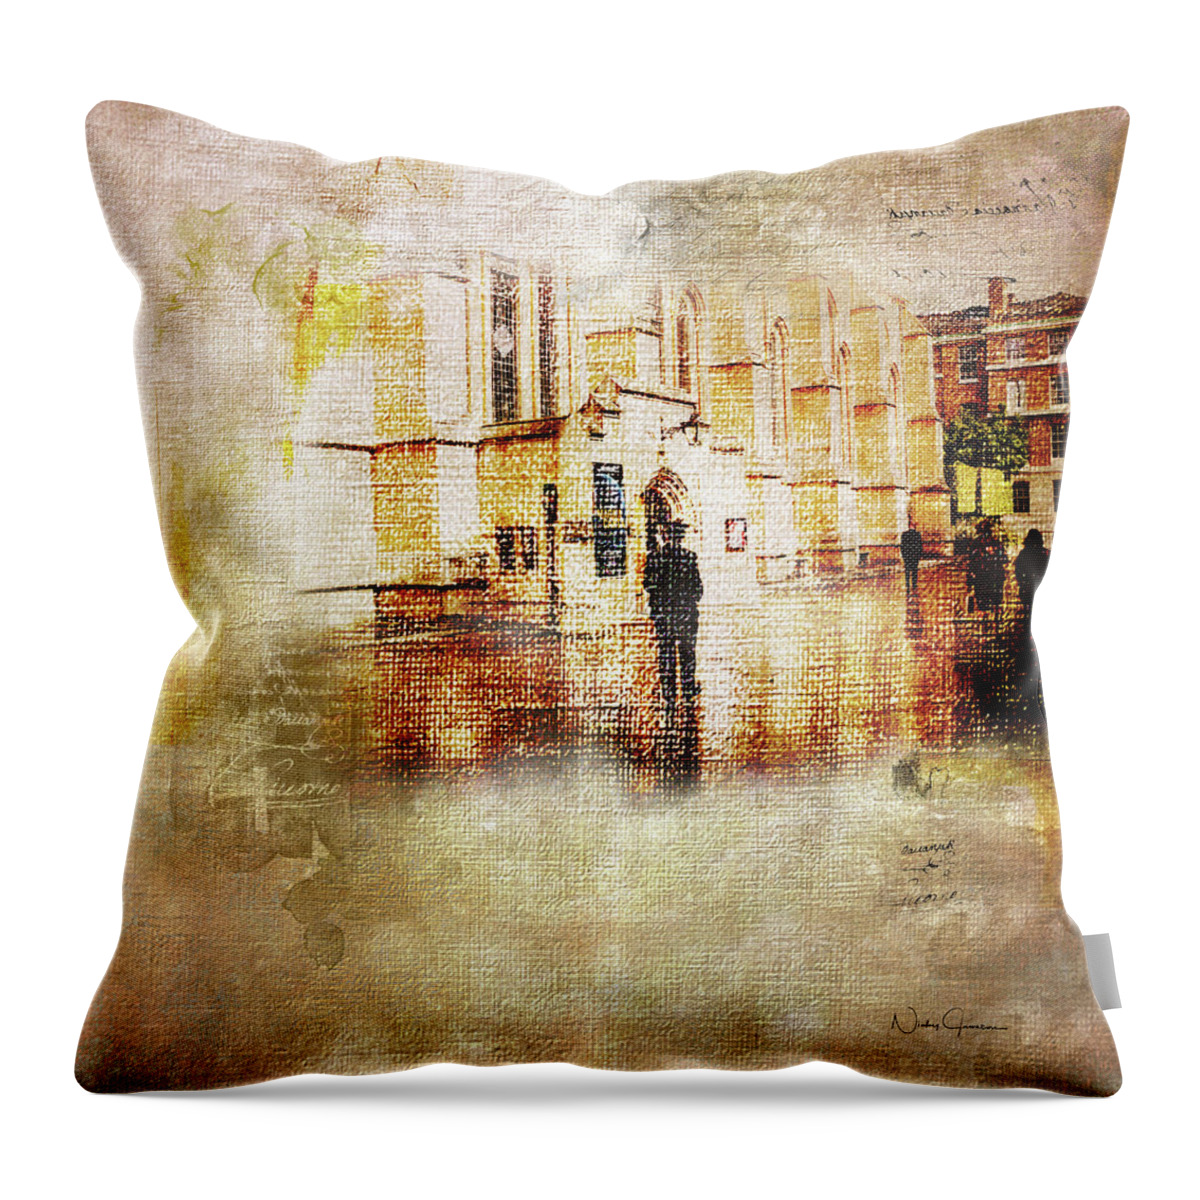 London Throw Pillow featuring the digital art Just Light - Middle Temple by Nicky Jameson